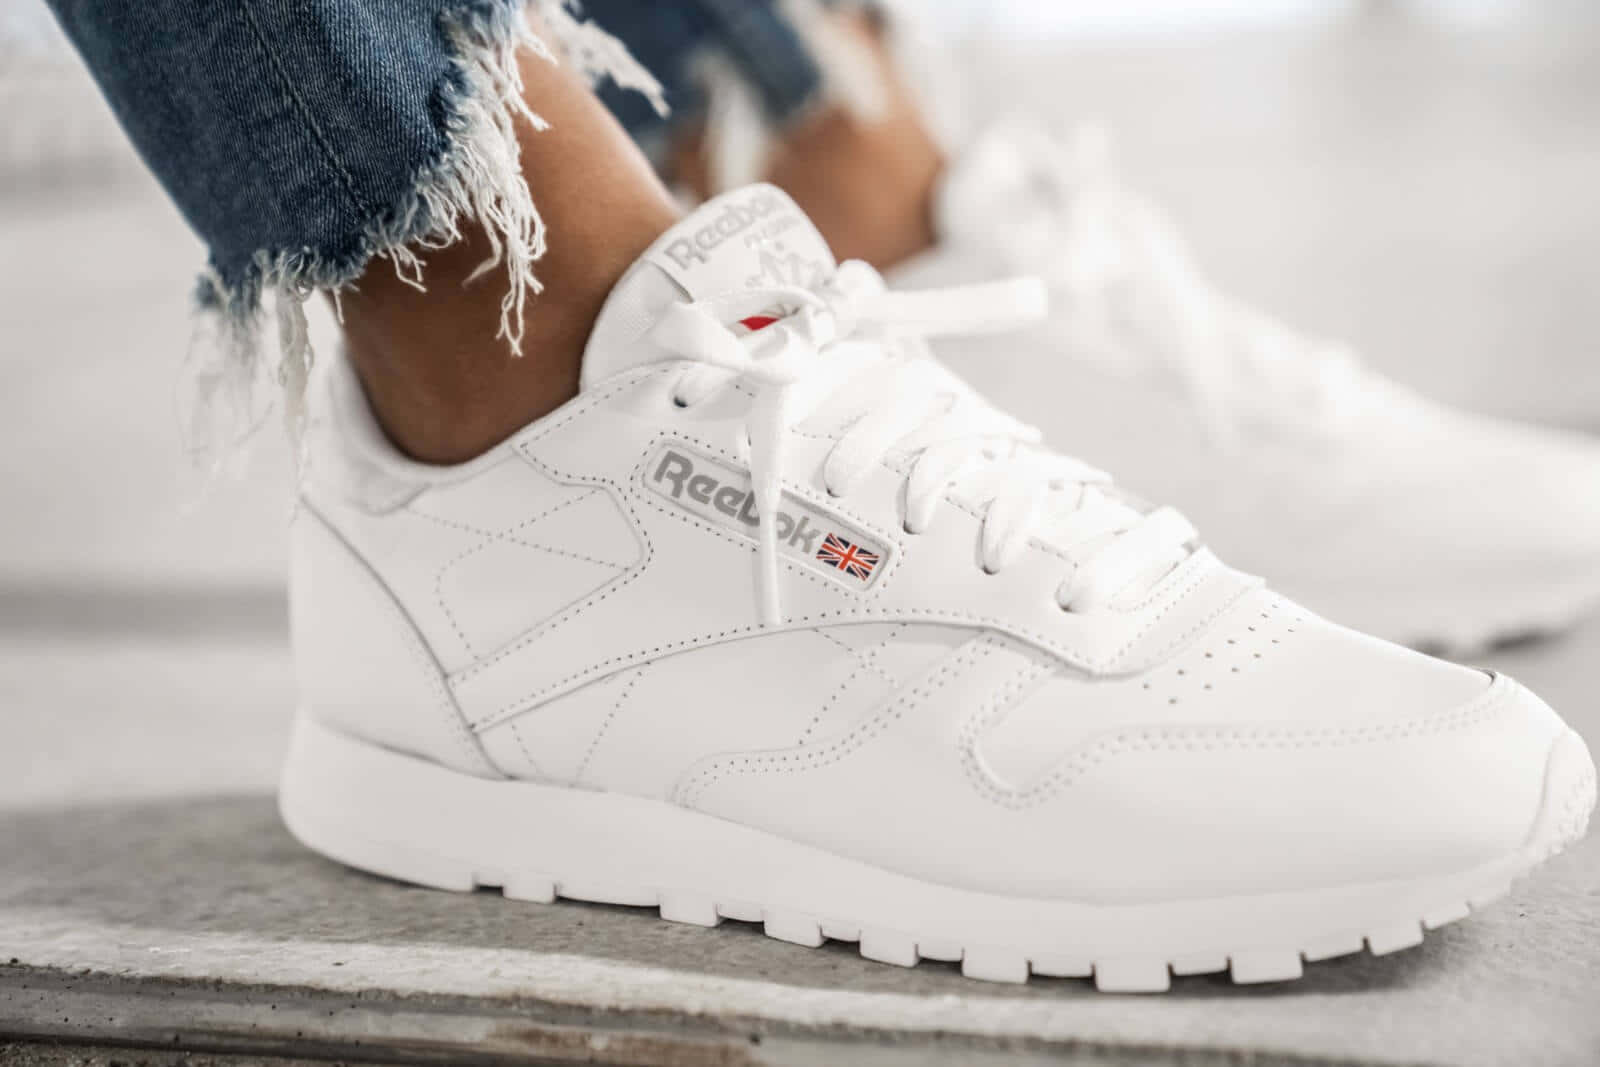 Take on the world with Reebok